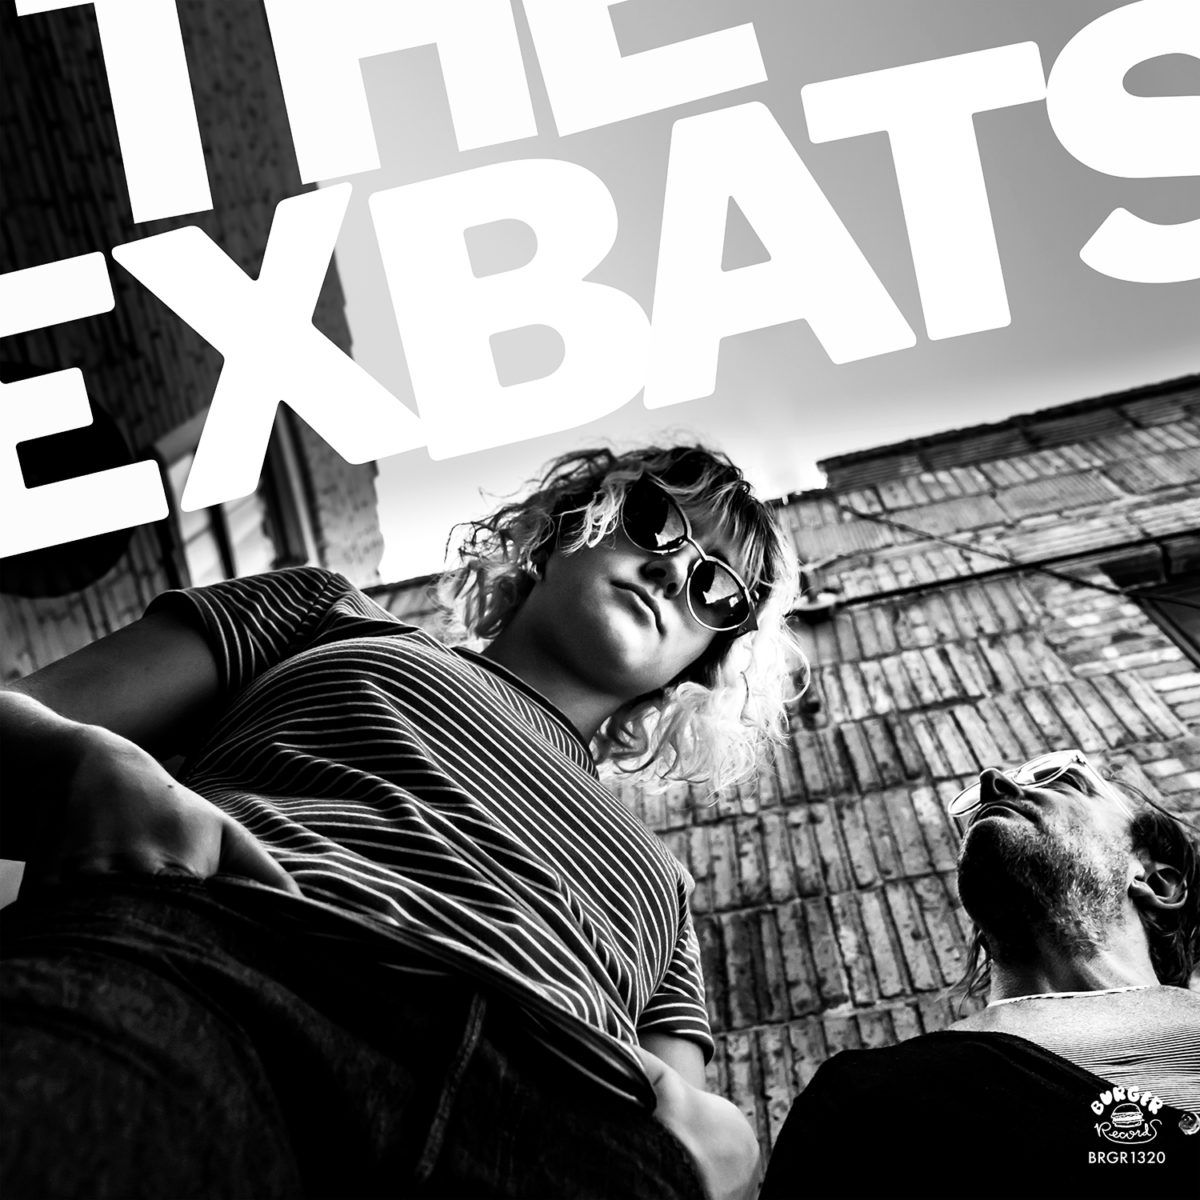 The Exbats | E Is For Exbats | 3hive.com